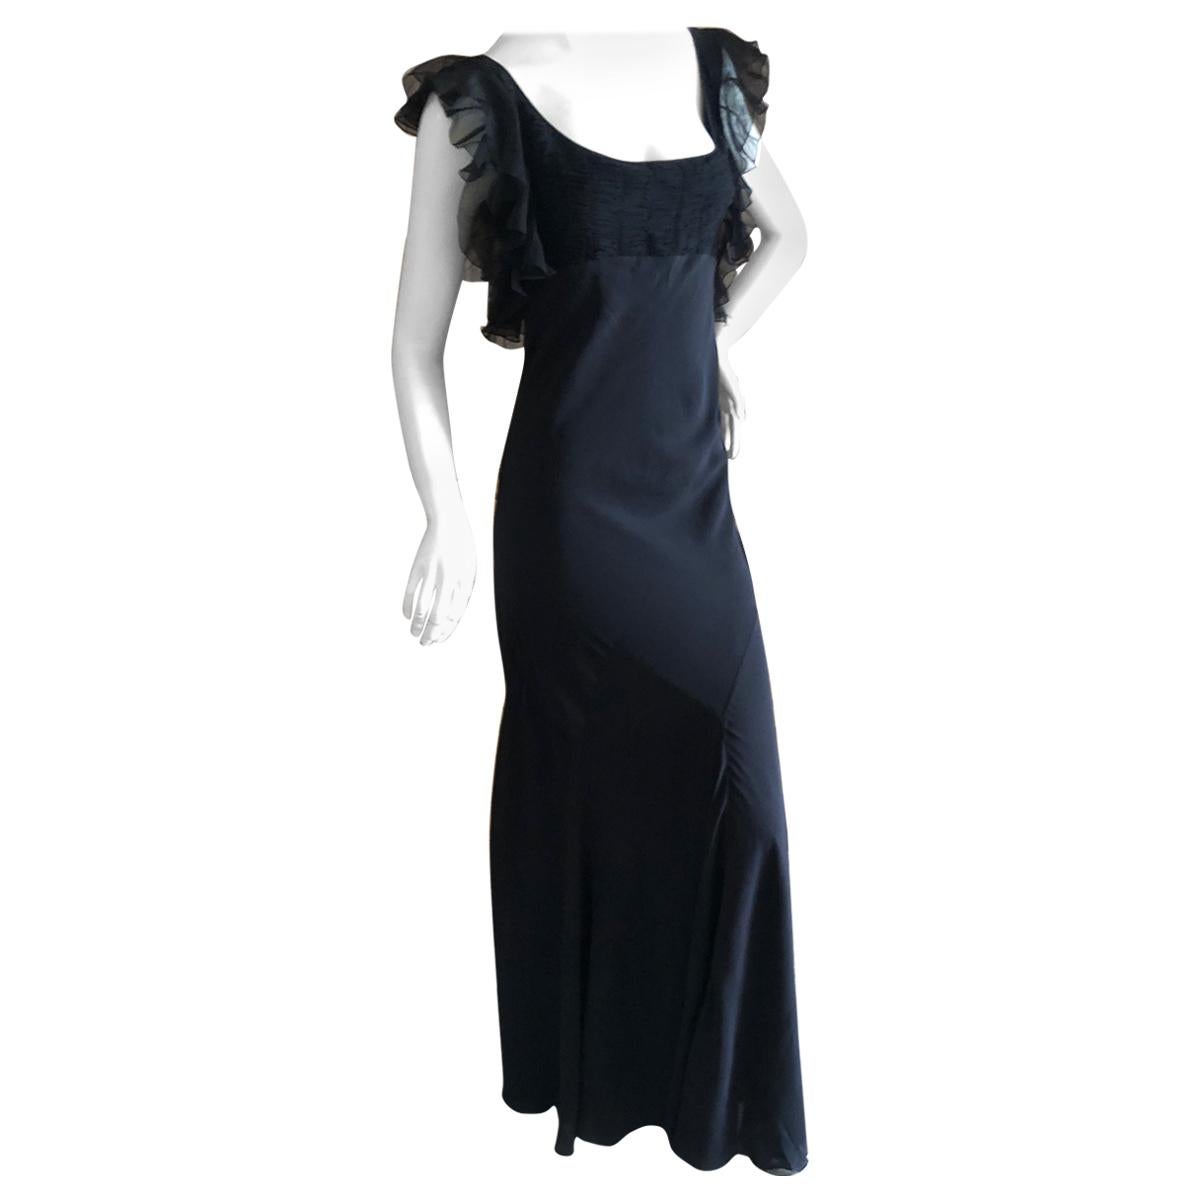 John Galliano Vintage Black Bias Cut Empire Style Evening Dress with Ruffles For Sale